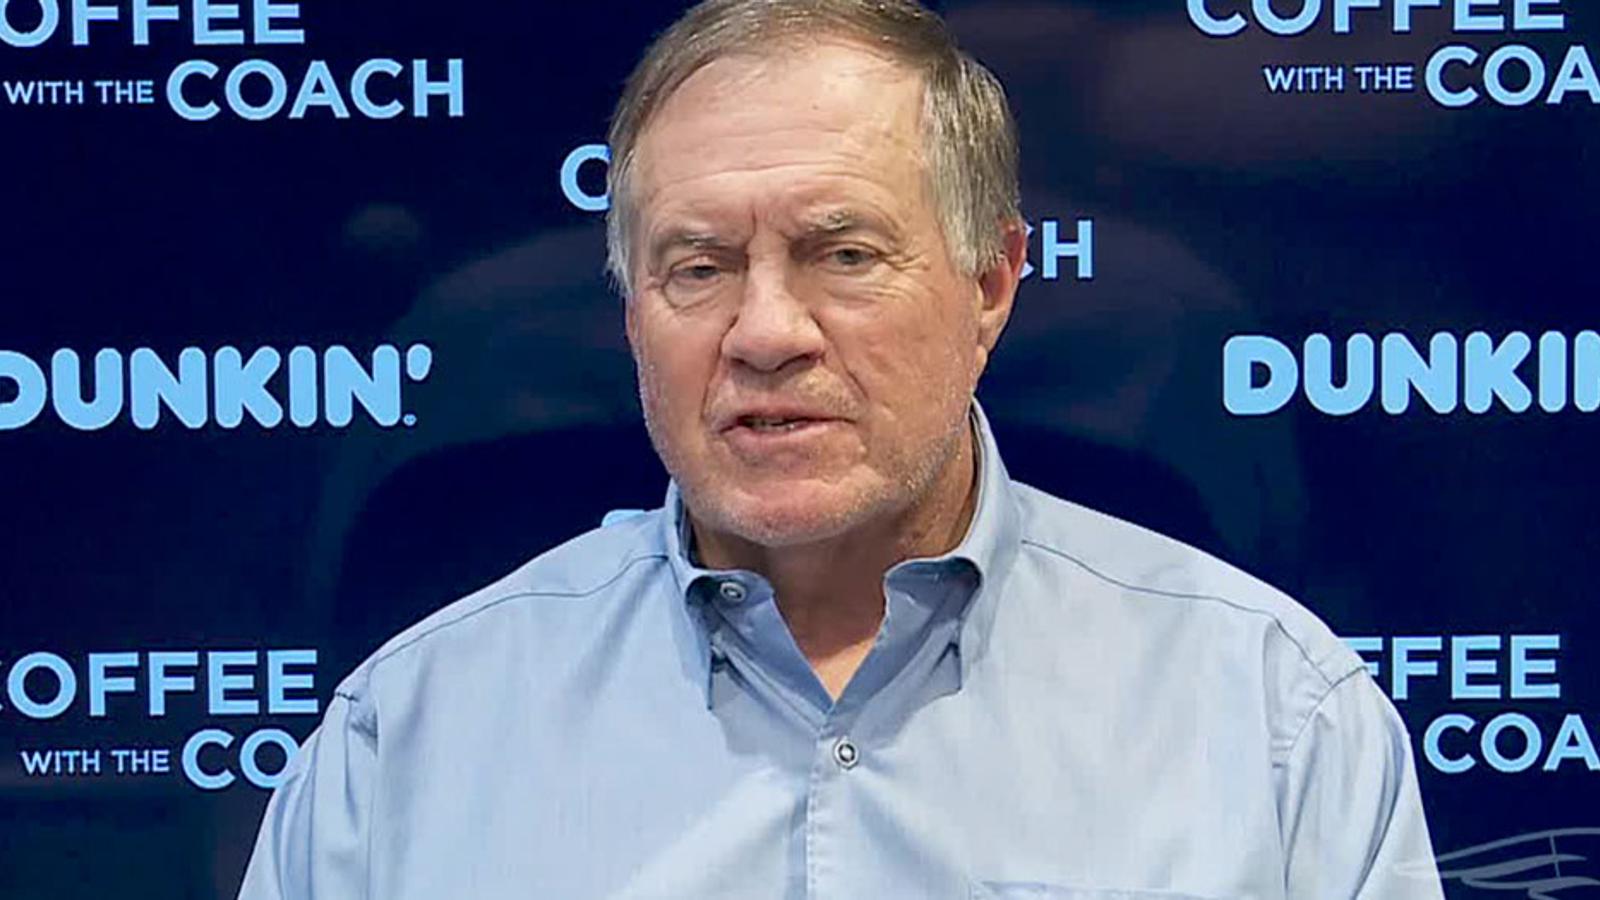 Ex-Patriot: I crashed my car intentionally so Bill Belichick wouldn't cut me 